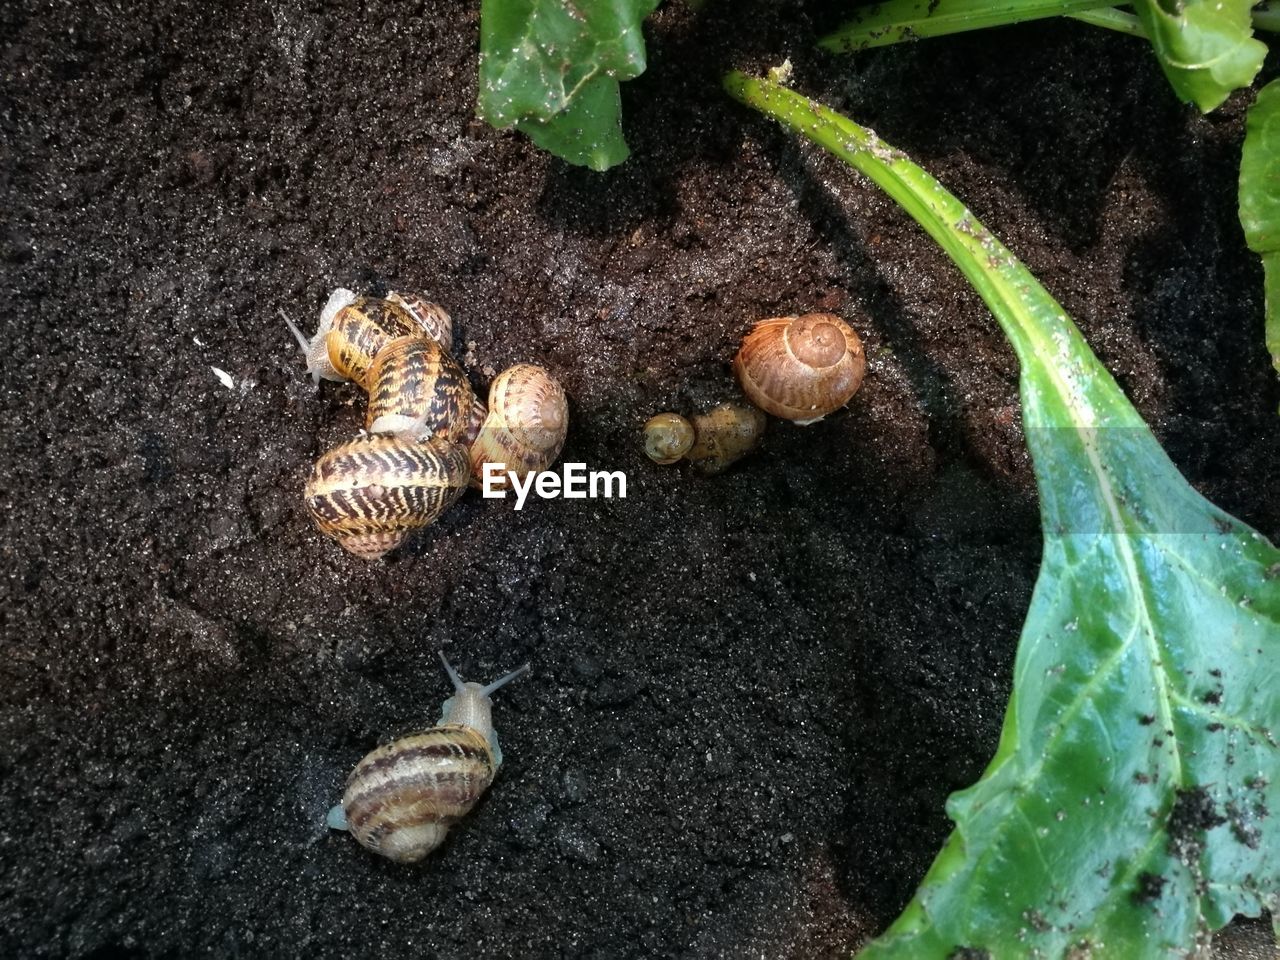 High angle view of snails on soil